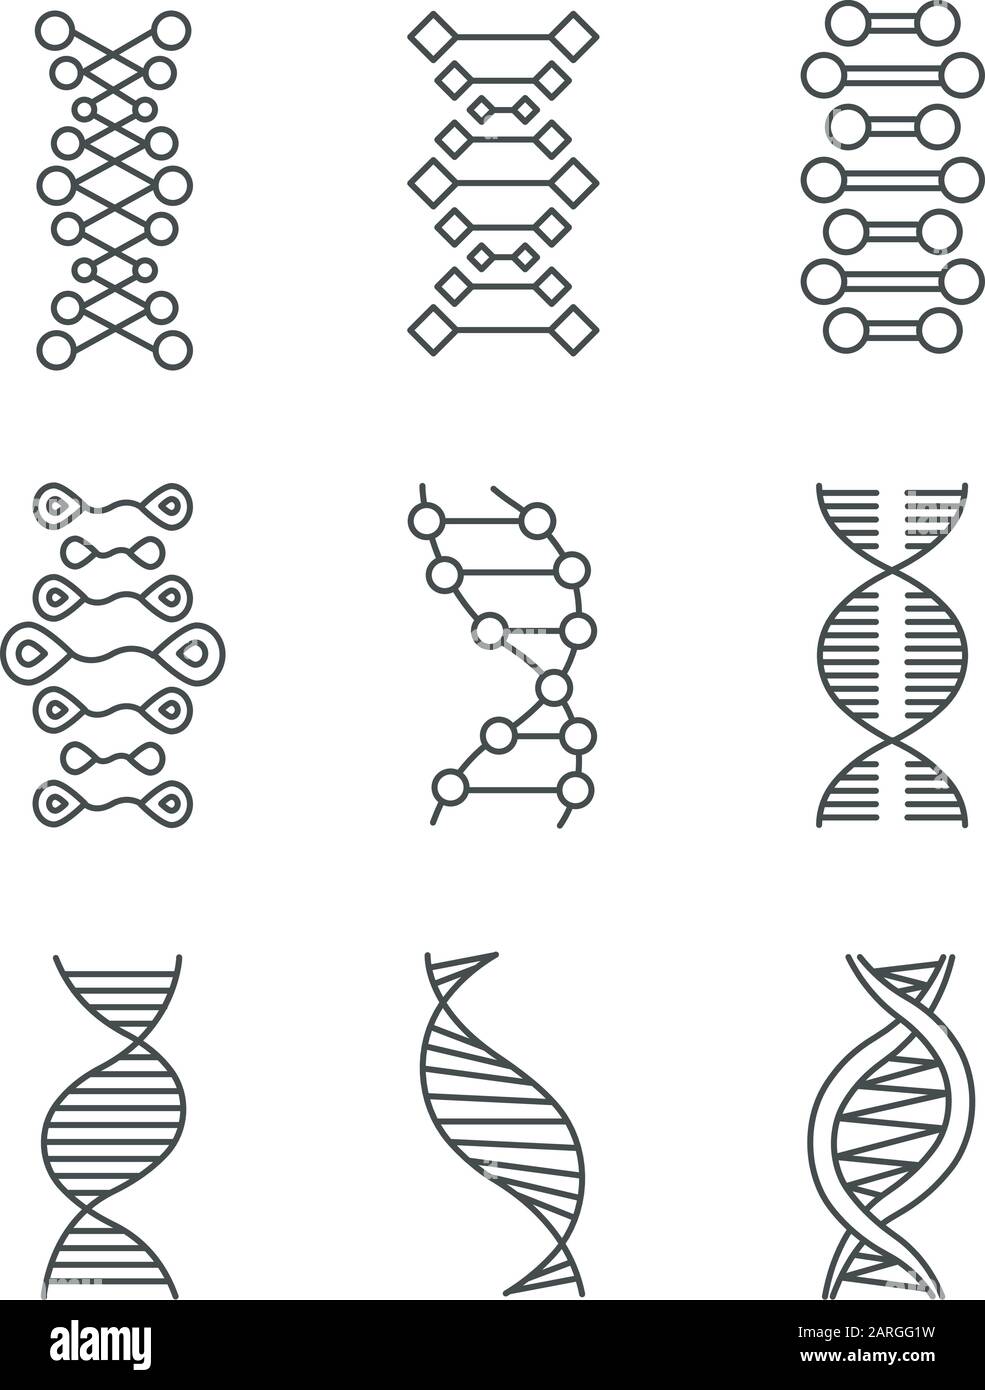 DNA double helix linear icons set. Deoxyribonucleic, nucleic acid. Molecular biology. Genetic code. Genetics. Thin line contour symbols. Isolated vect Stock Vector